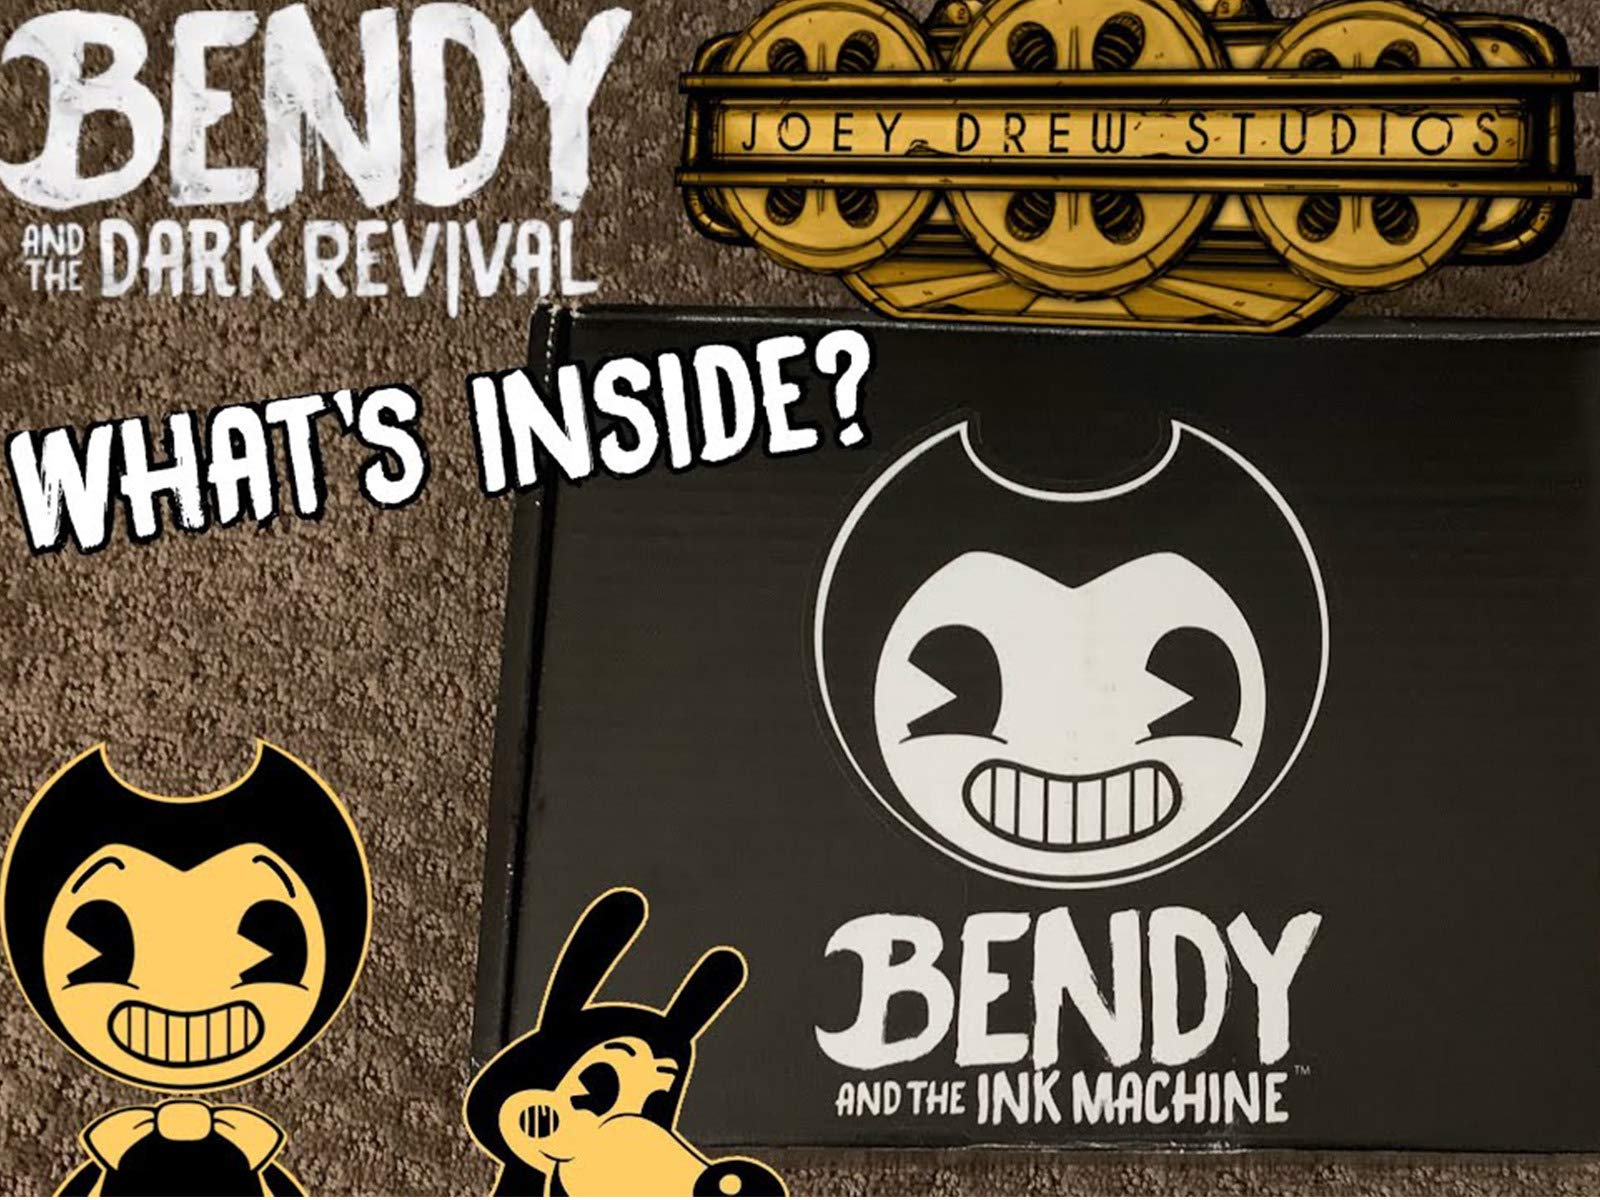 Bendy And The Dark Revival. Lllâ. 2020 07 01